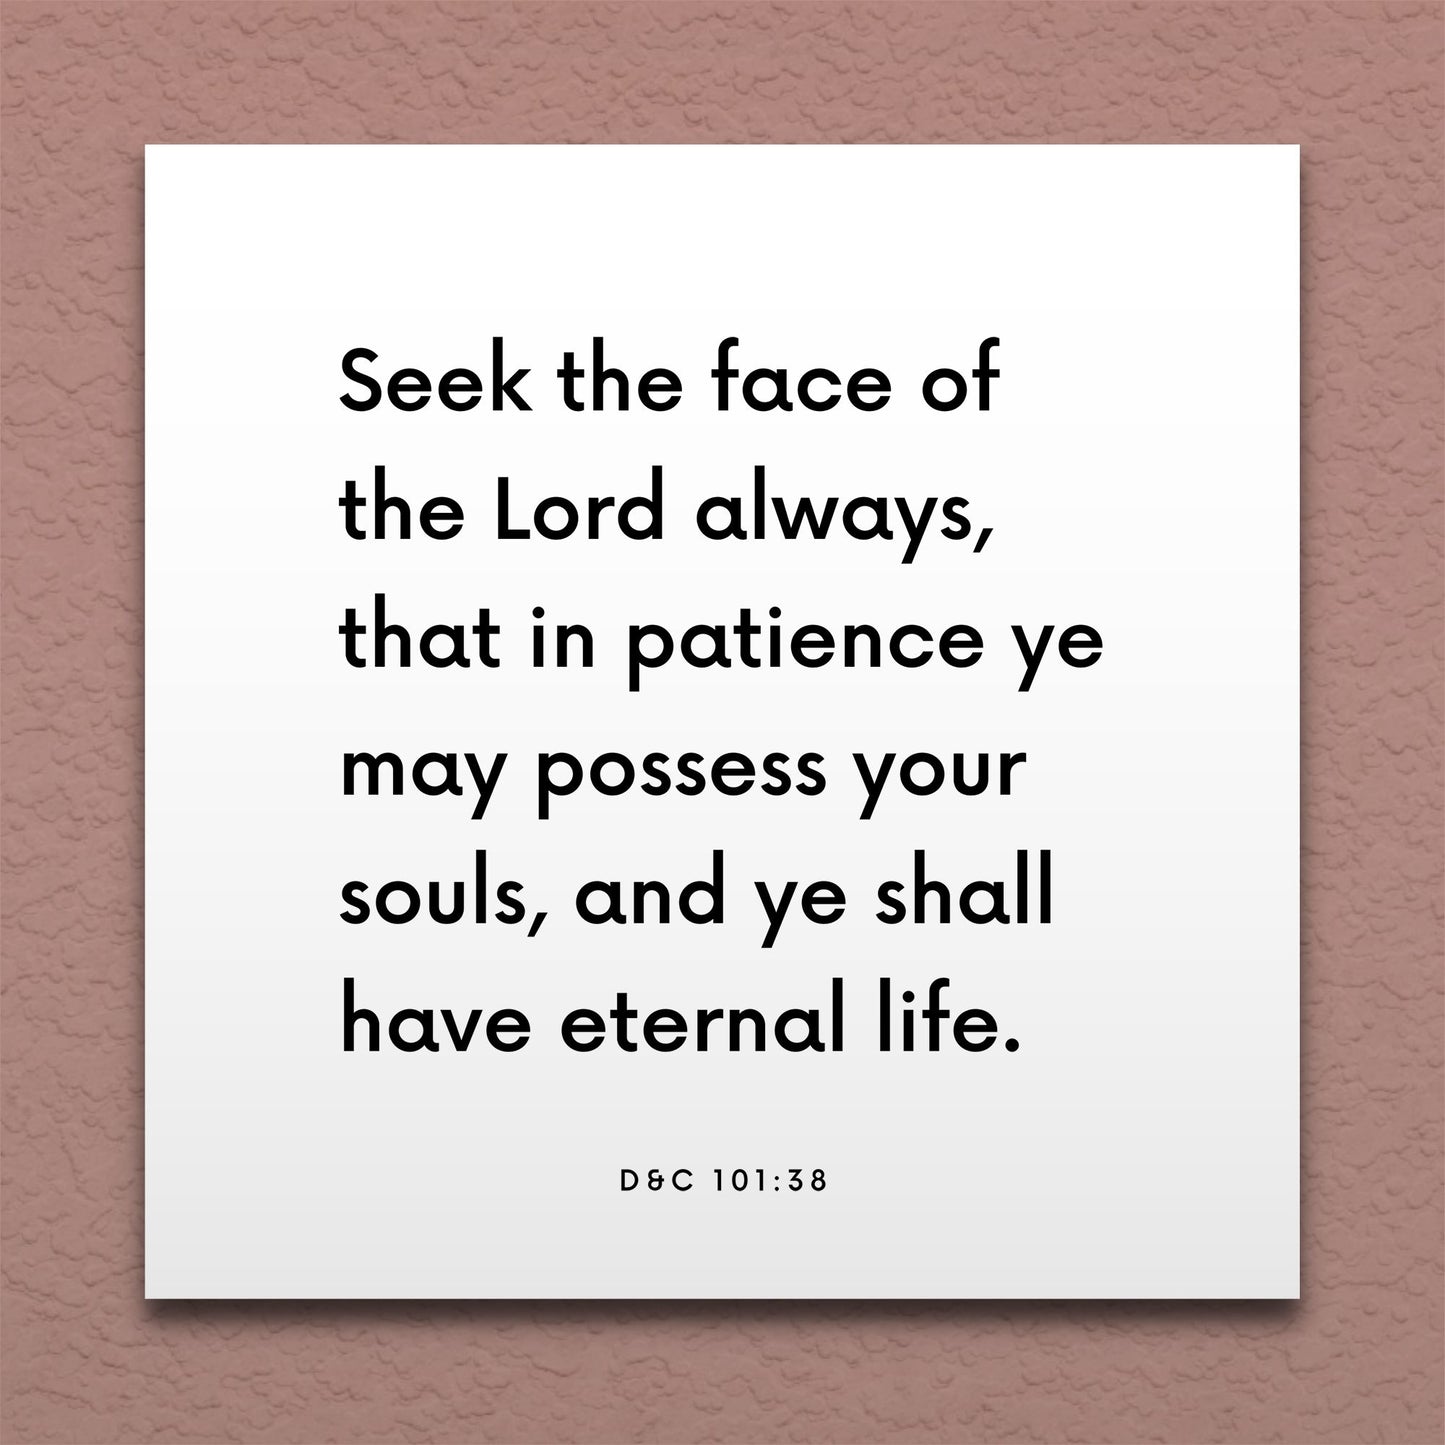 Wall-mounted scripture tile for D&C 101:38 - "Seek the face of the Lord always"